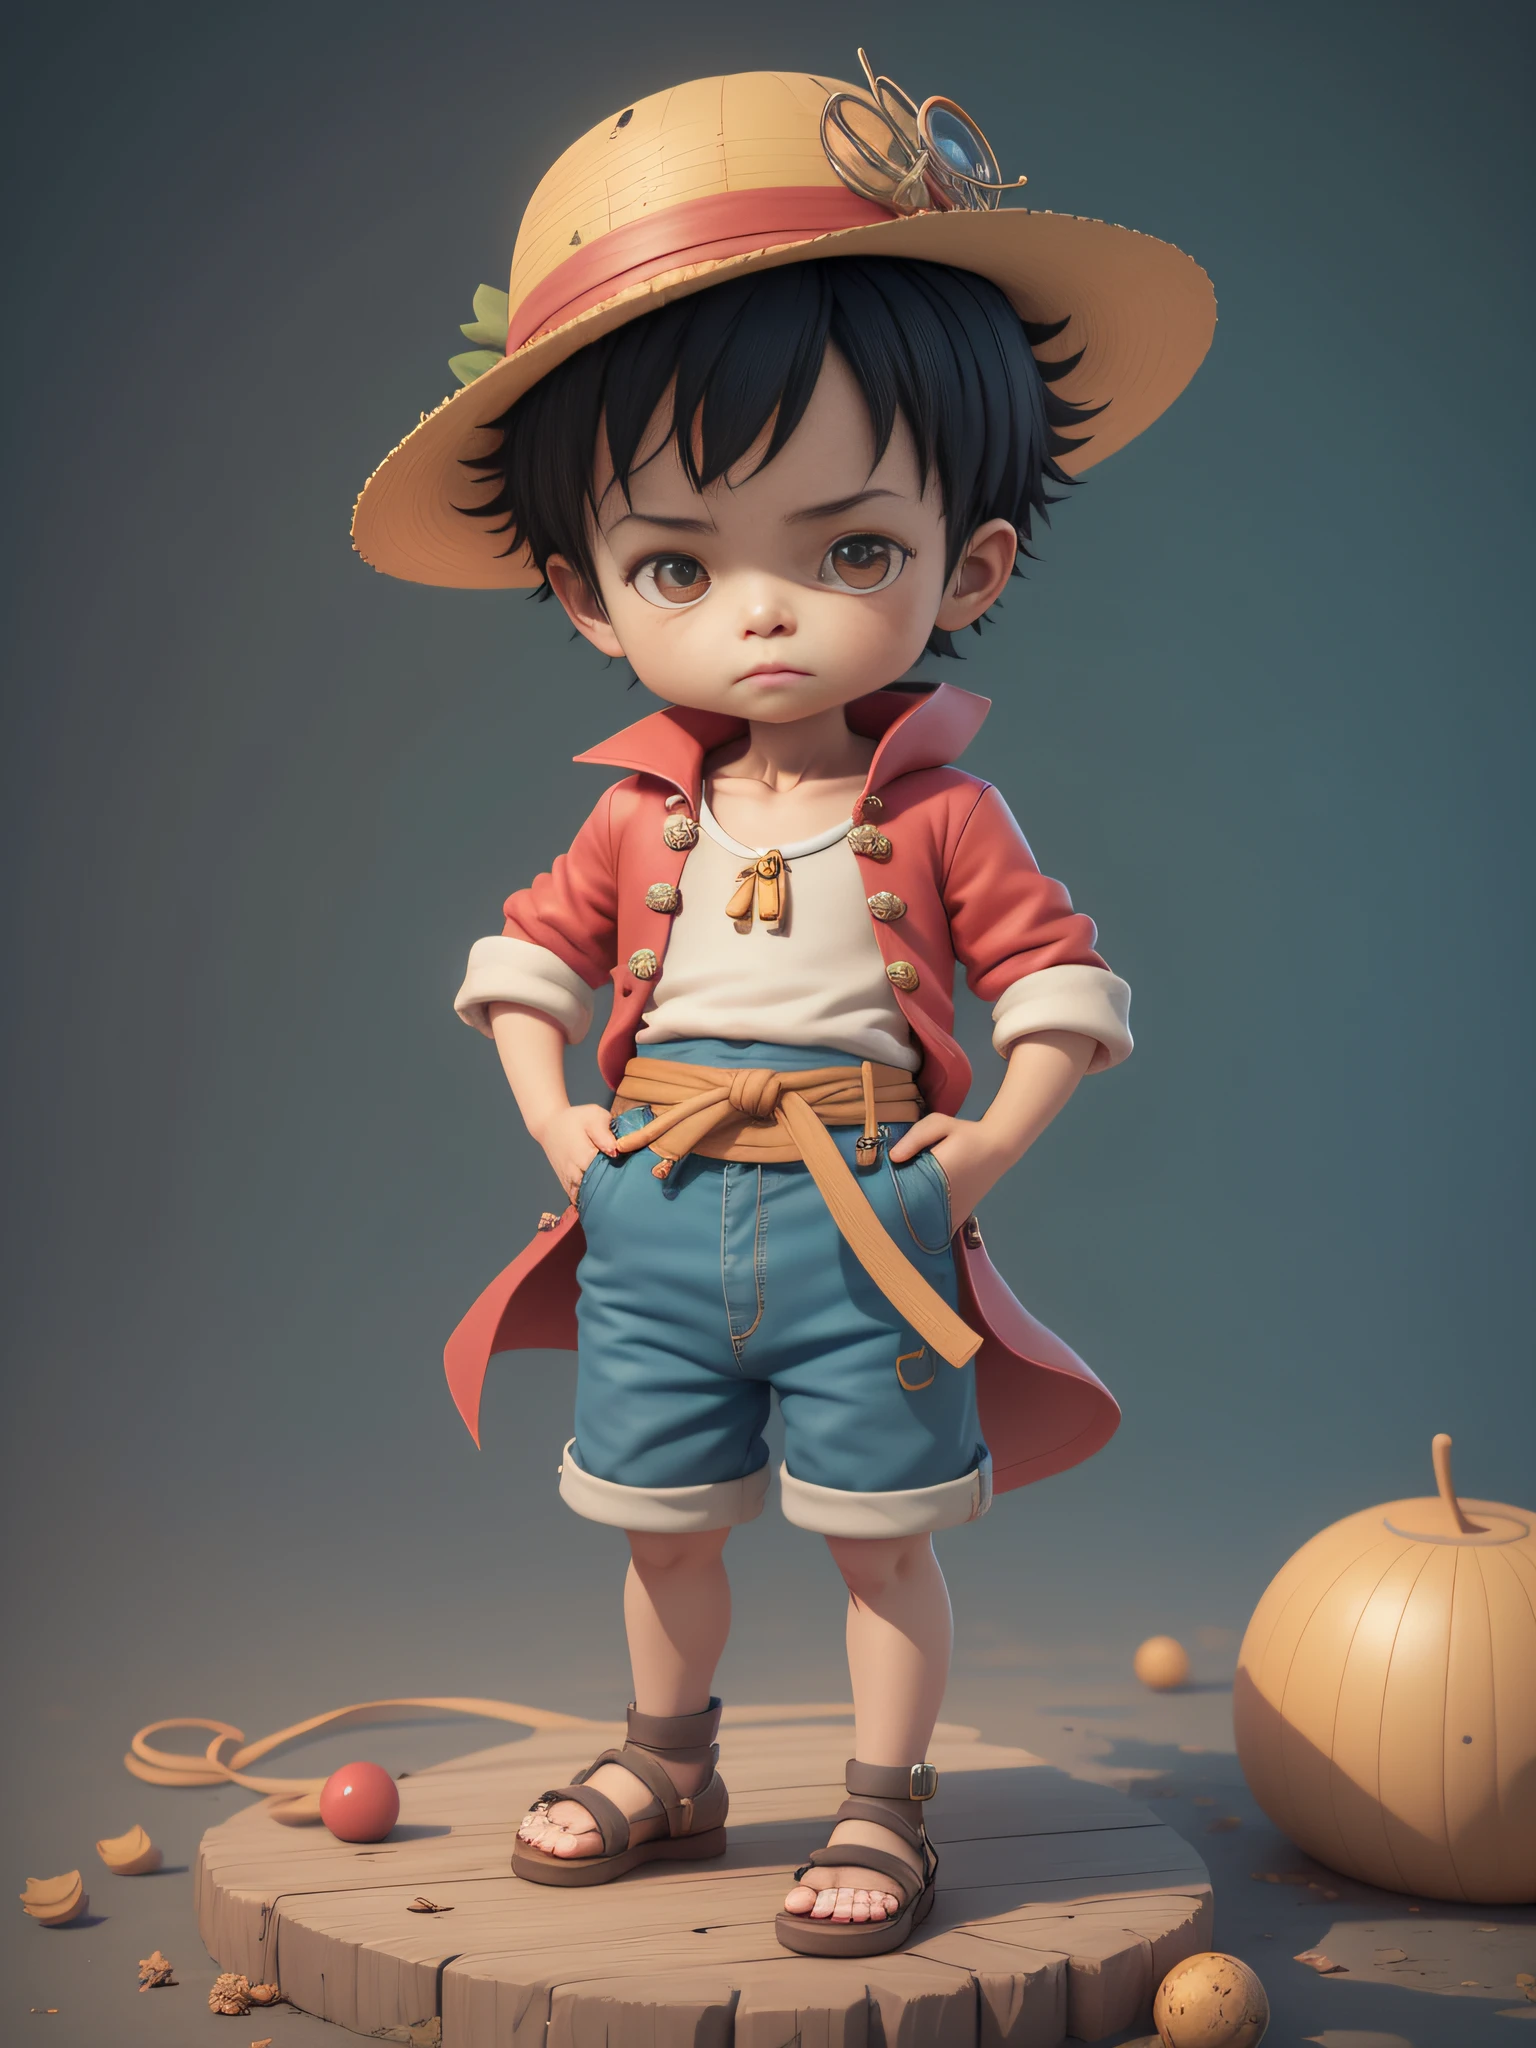 cute 3d render, cute detailed digital art, male explorer mini cute boy, cute digital painting, stylized 3d render, cute digital art, cute render 3d anime boy, luffy the little pirate looks up, cute! c4d, portrait anime sea pirate boy, he is wearing an open long-sleeved red cardigan with four buttons, with a yellow sash tied around his waist, blue shorts with cuffs, sandals.